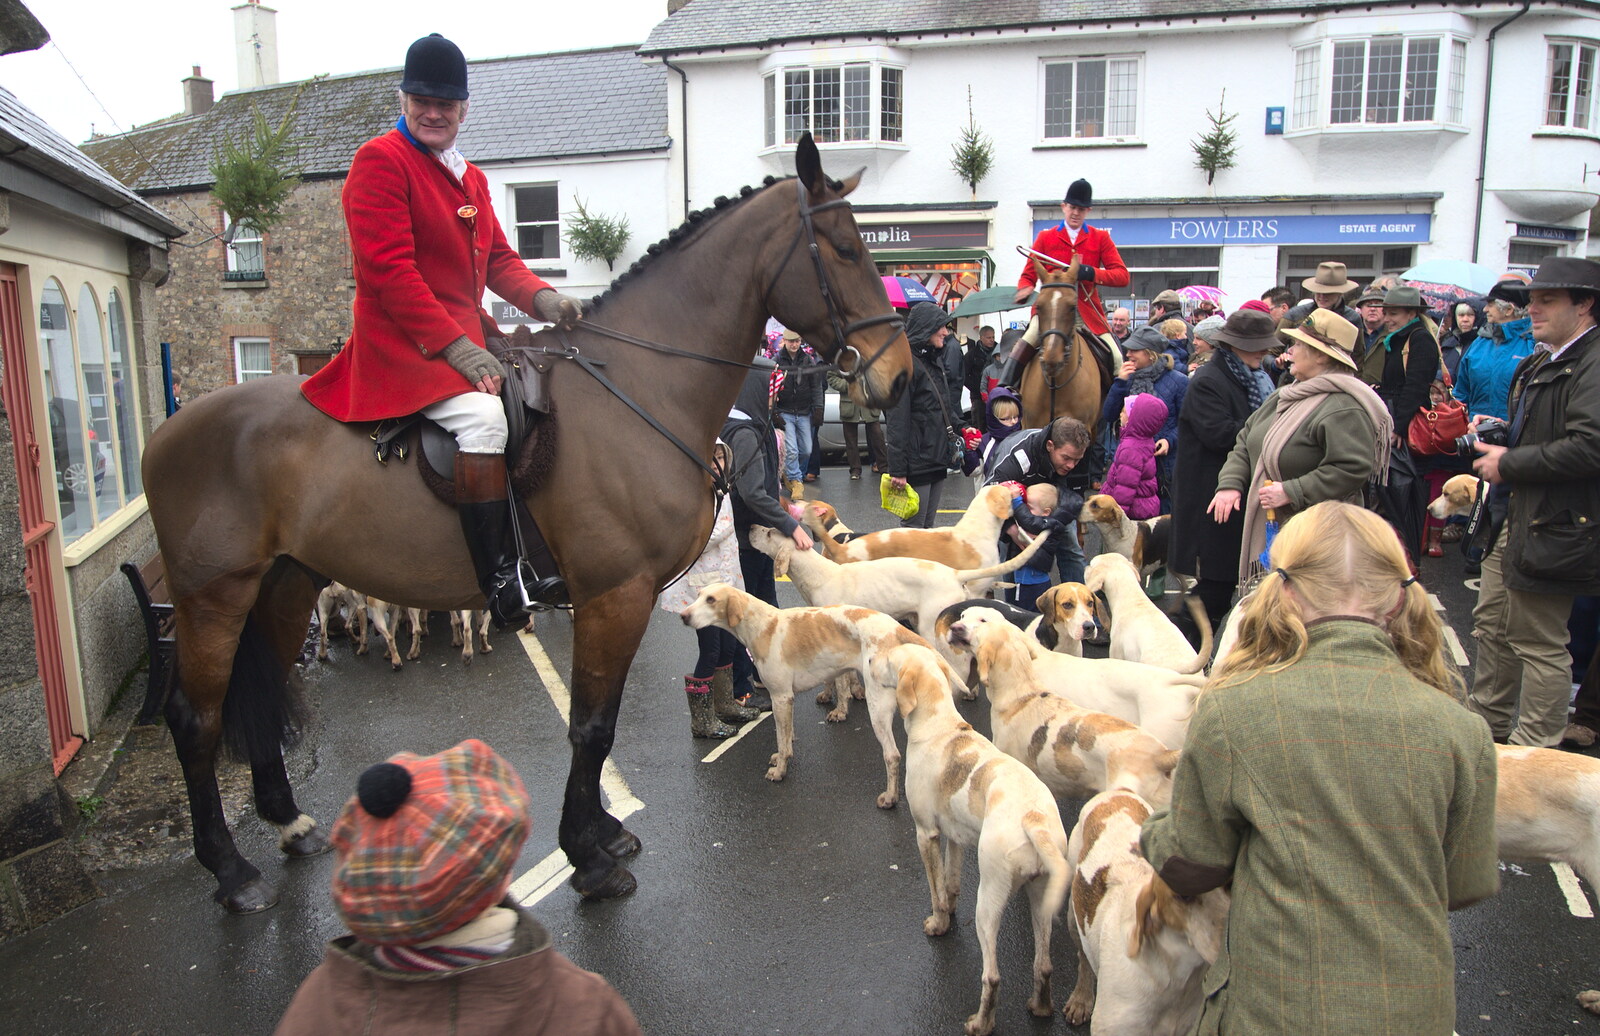 The hunt Master surveys the scene from The Boxing Day Hunt, Chagford, Devon - 26th December 2012